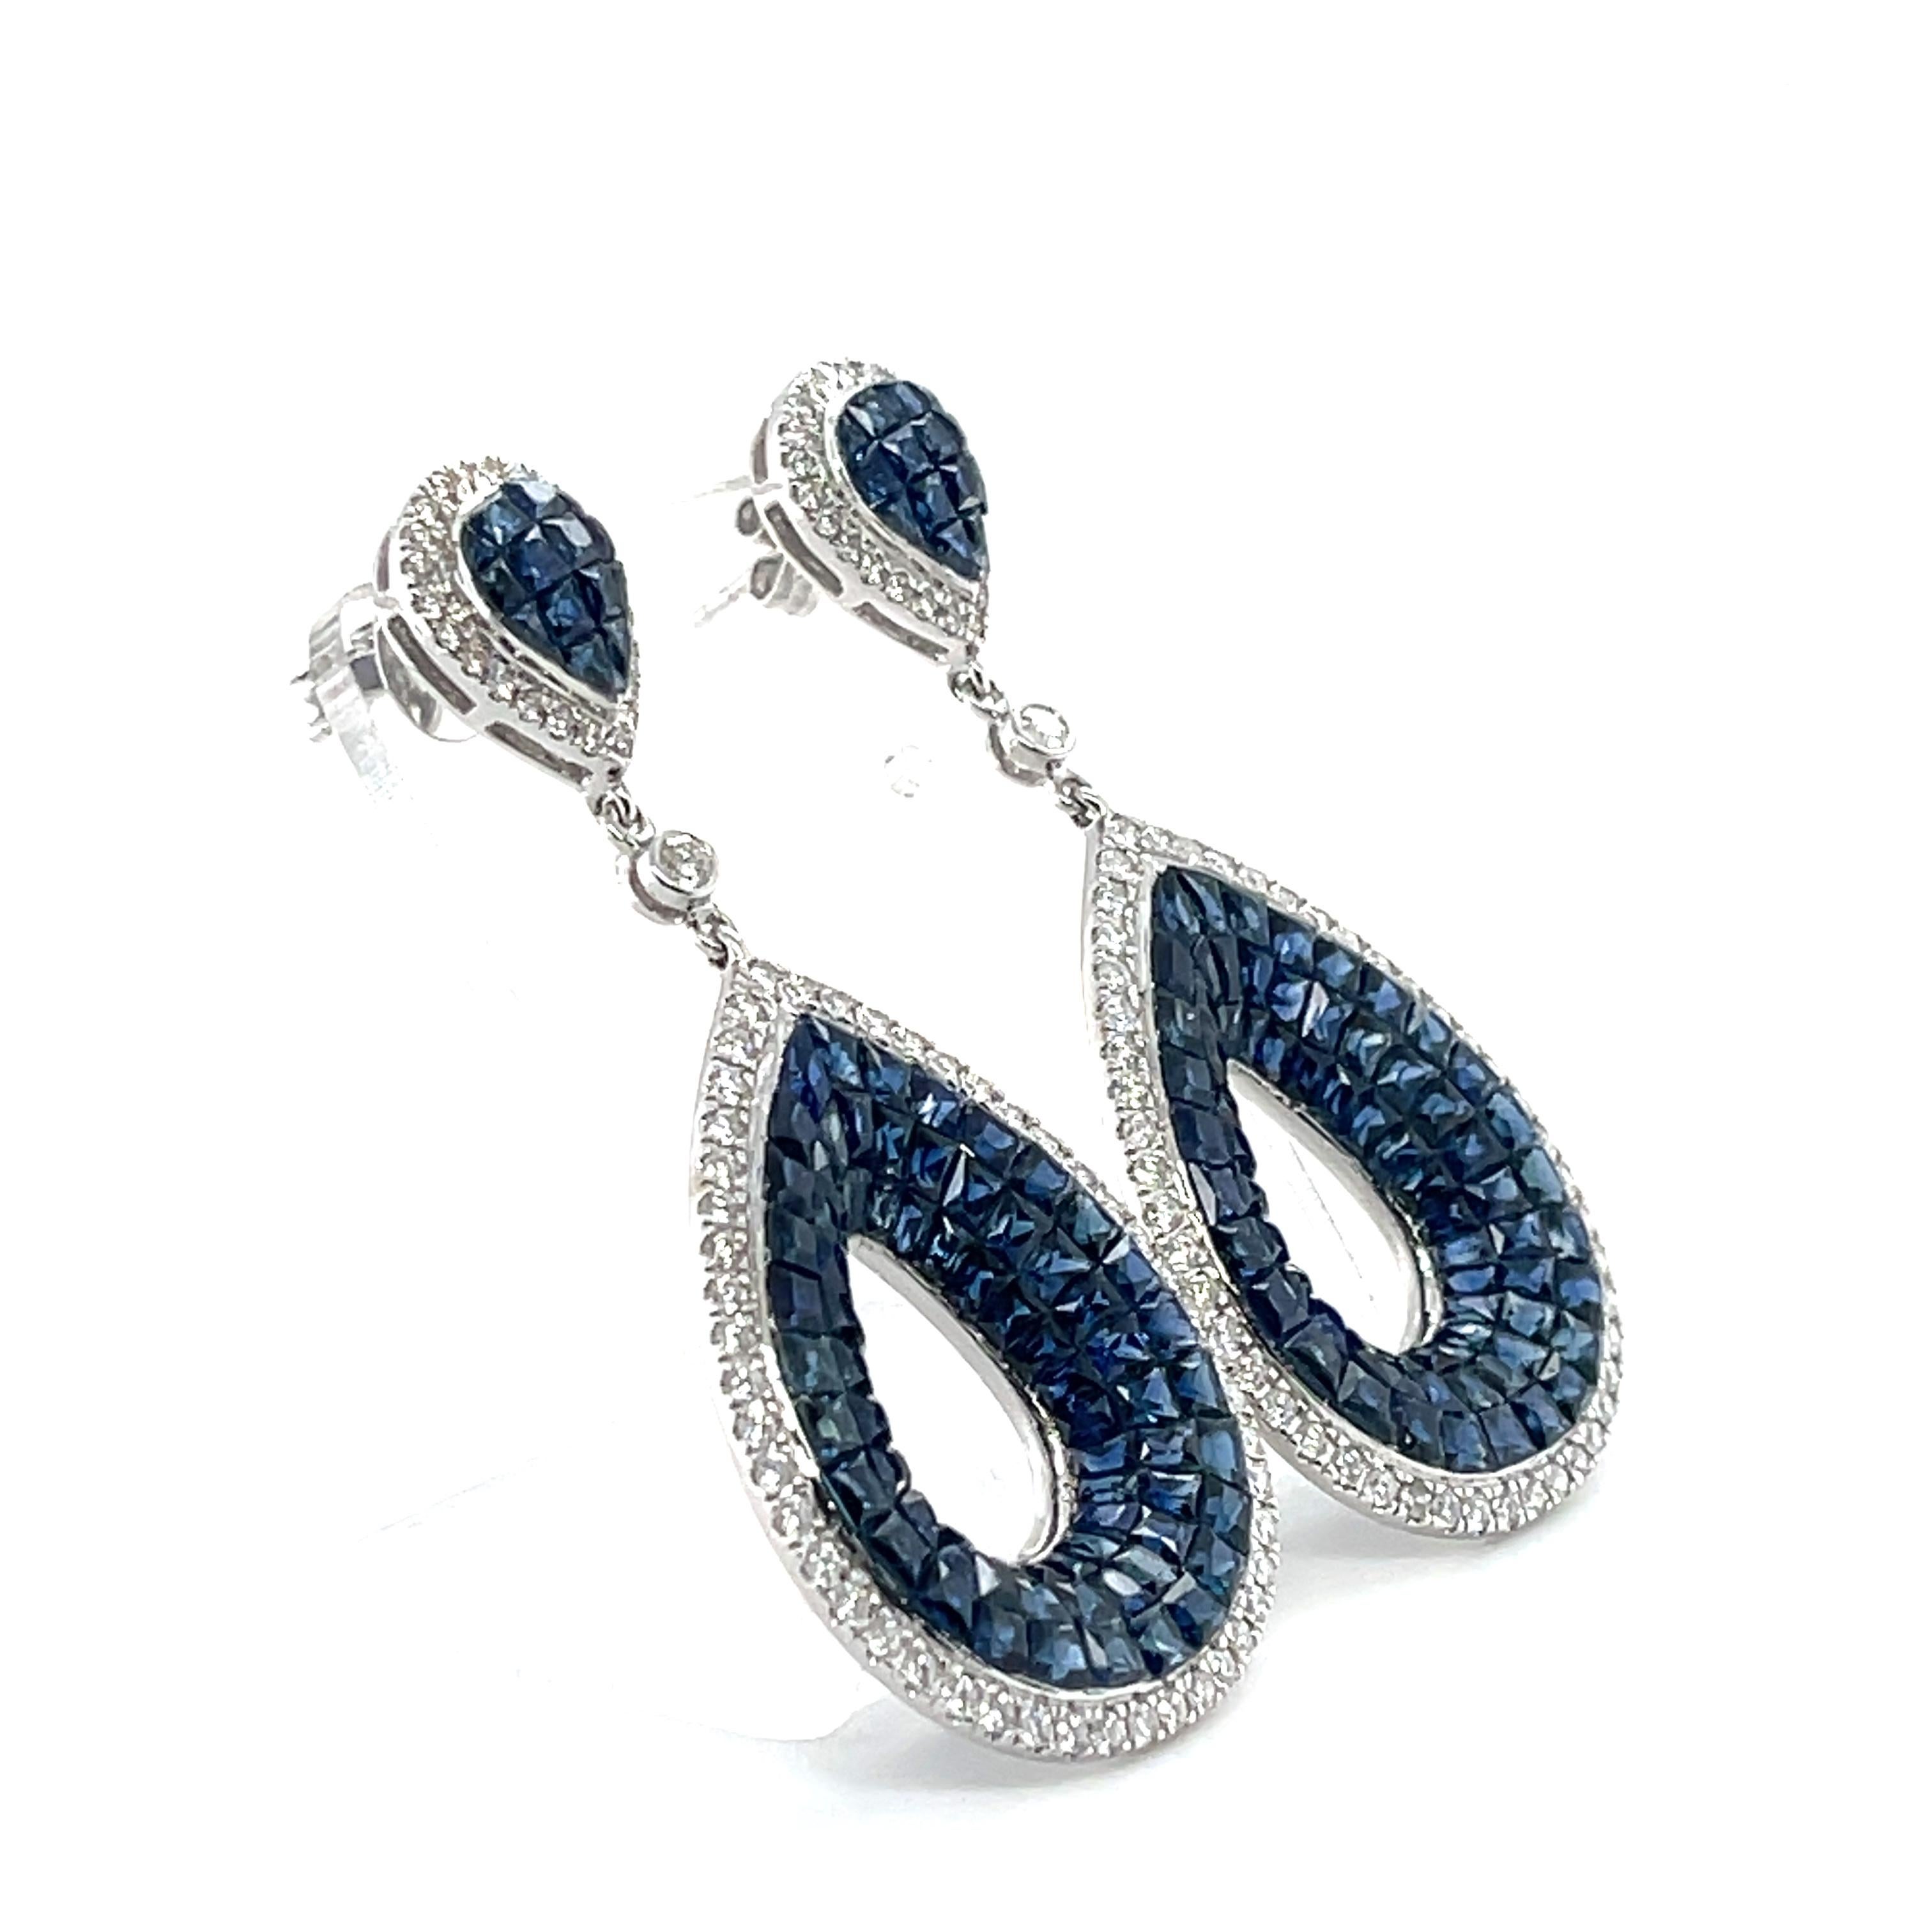 Sapphires and Diamonds, crafted with eighteen karat white gold, featuring a stunning selection of one-hundred and ninety invisible set rectangular cushion natural blue sapphires and one-hundred and forty six claw and bead set round brilliant cut